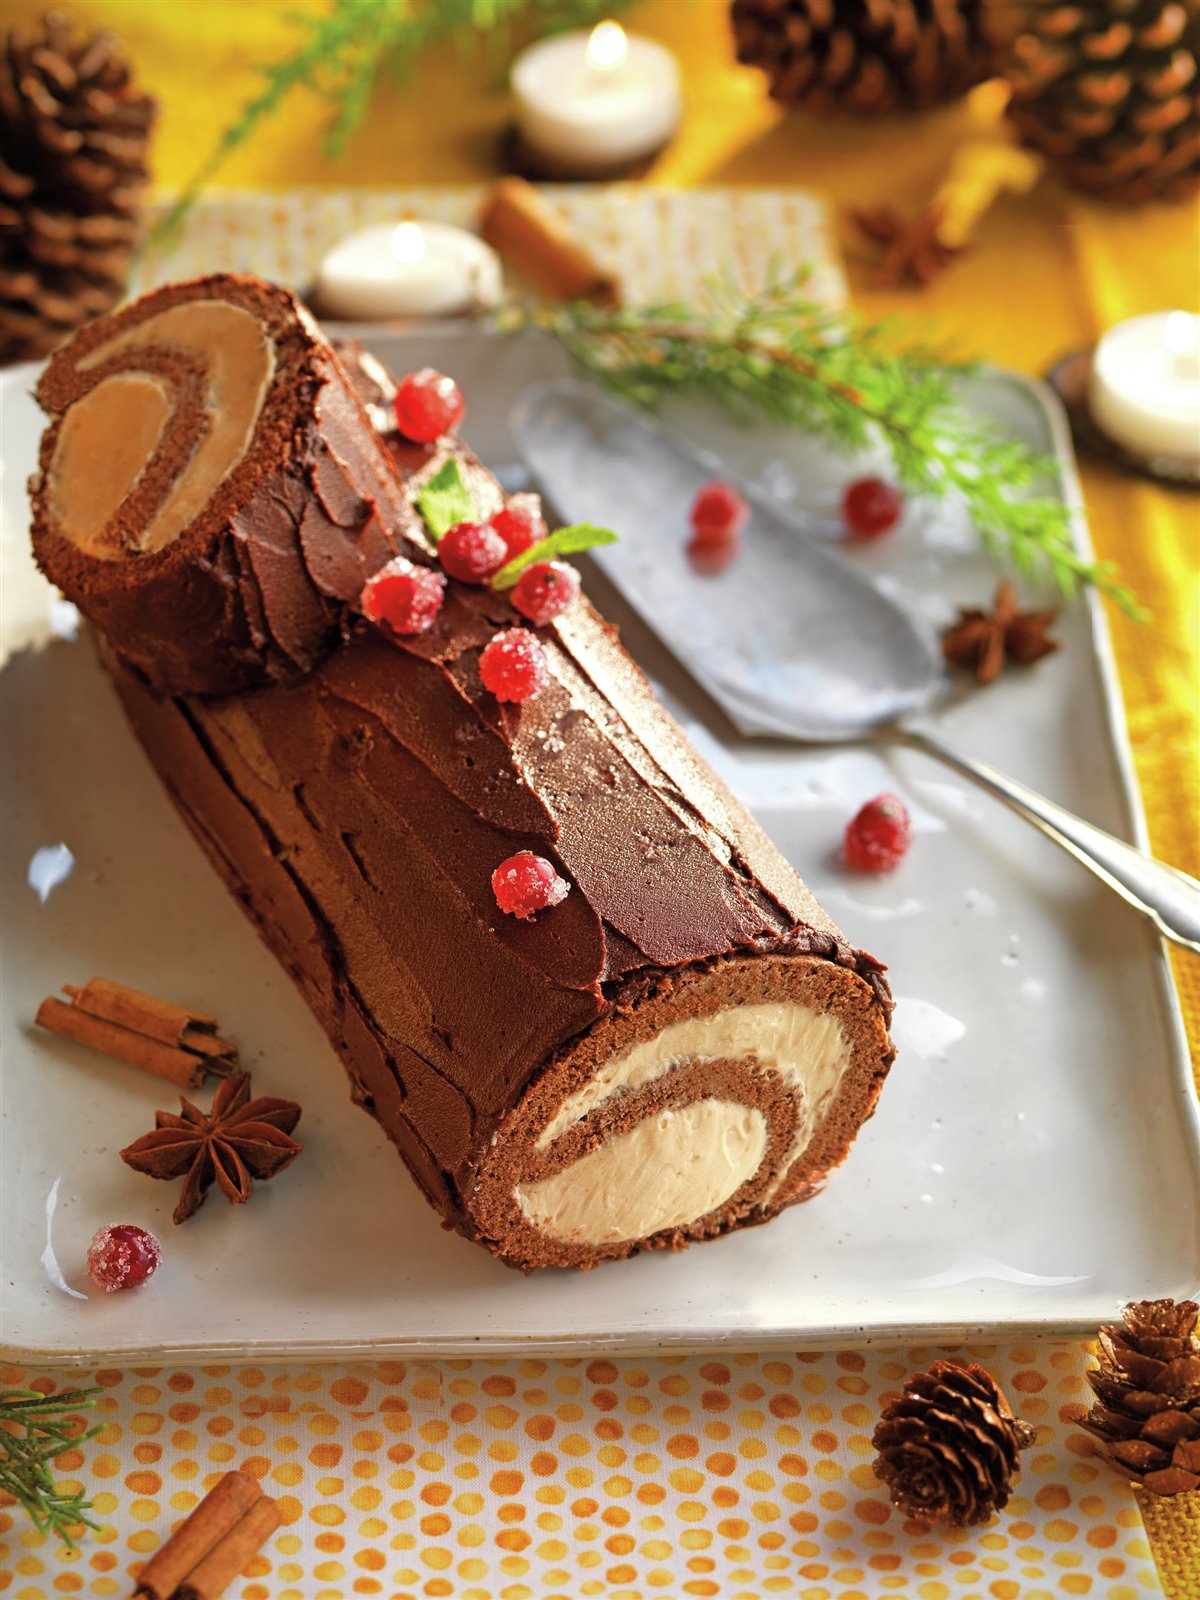 step_by_step_to_make_chocolate_trunk_filled_with_nougat_cream_final_result 00532493.jpg